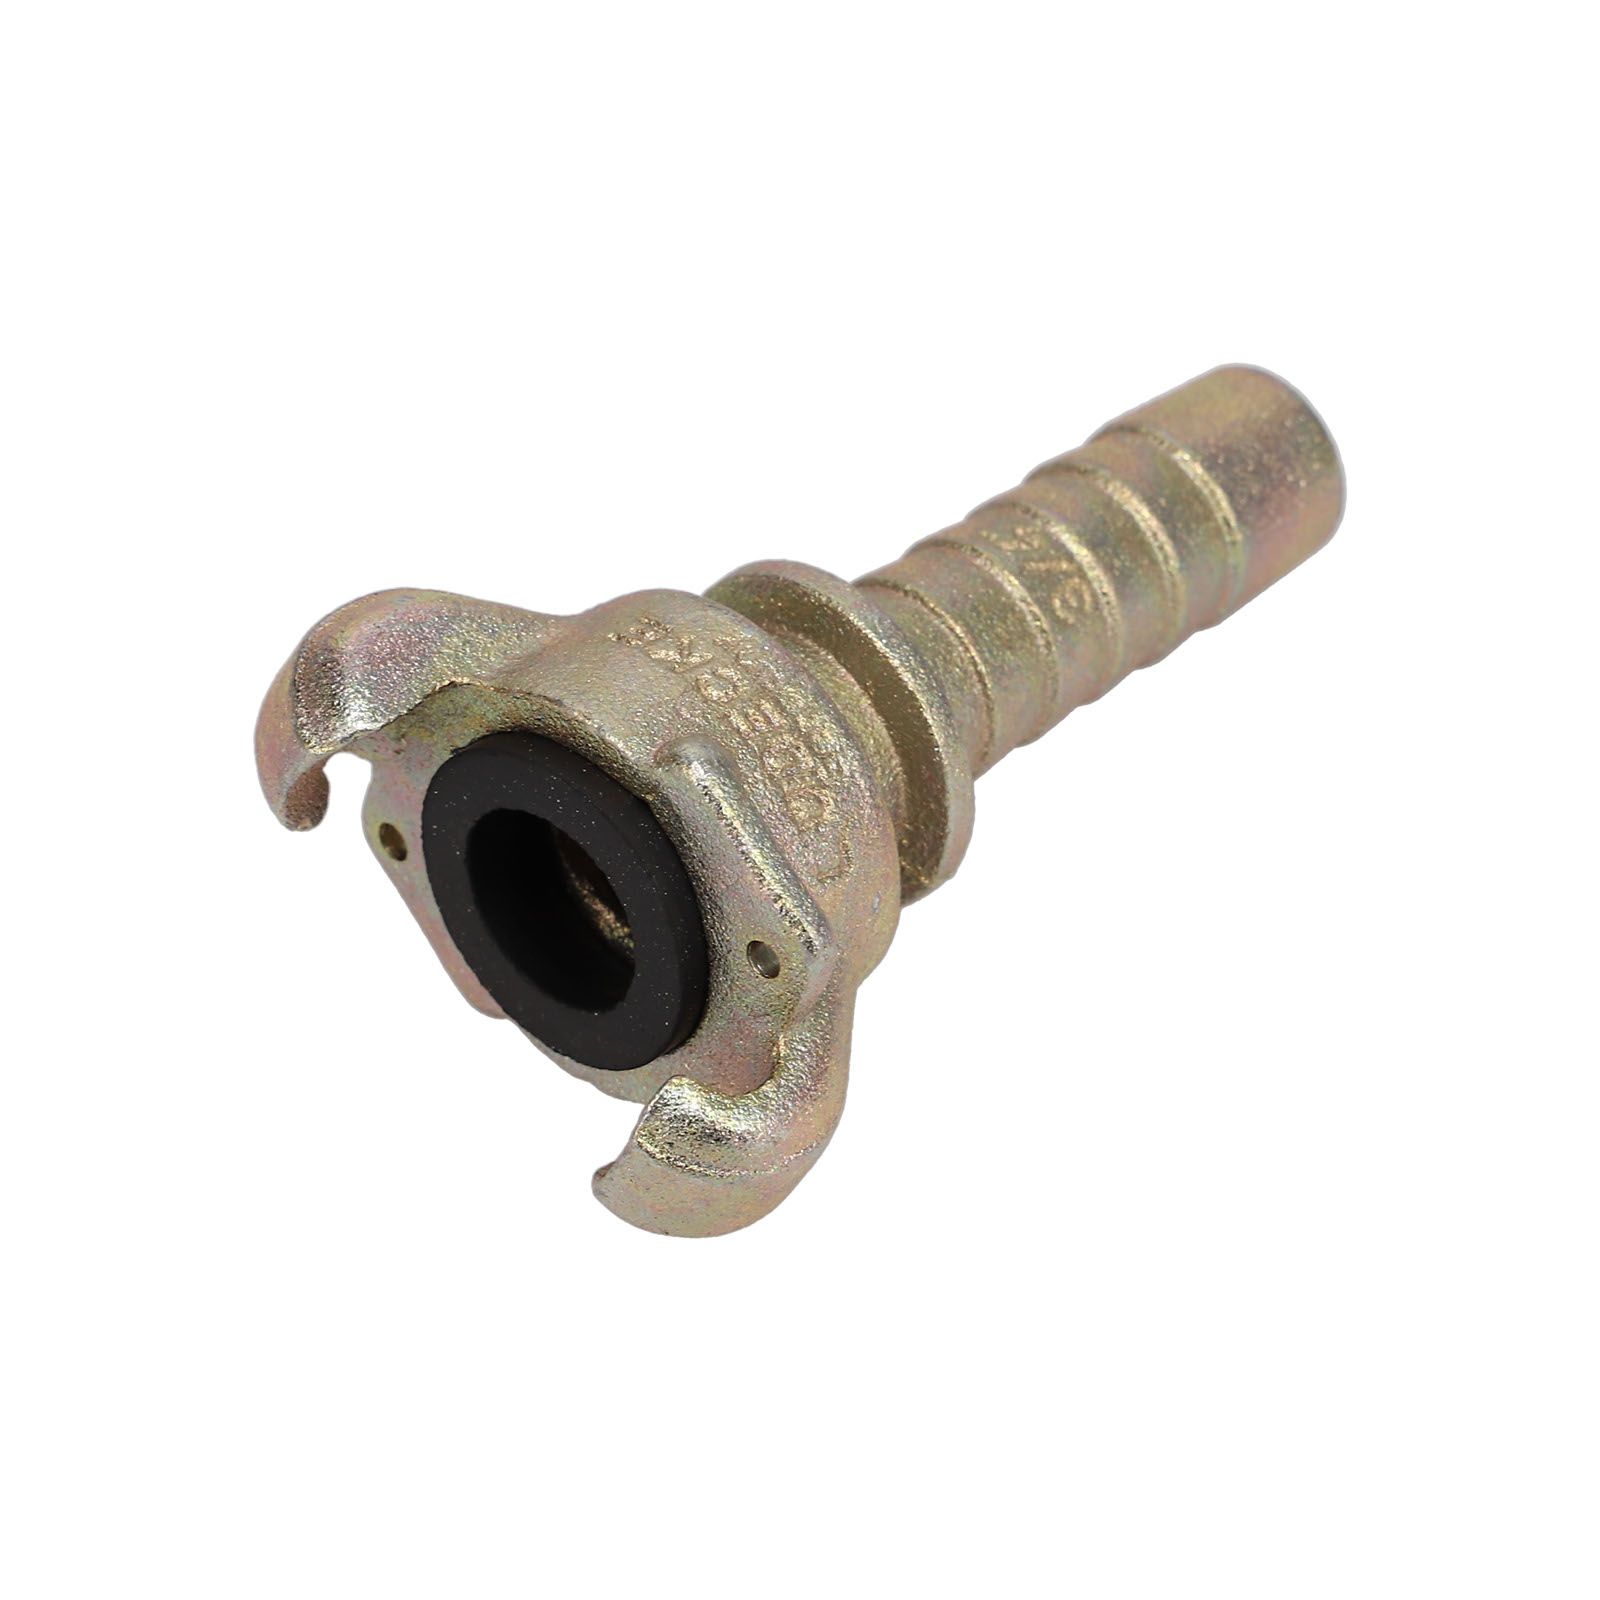 CASTED US CLAW COUPLING 3/4INCH (HN) foto de producto